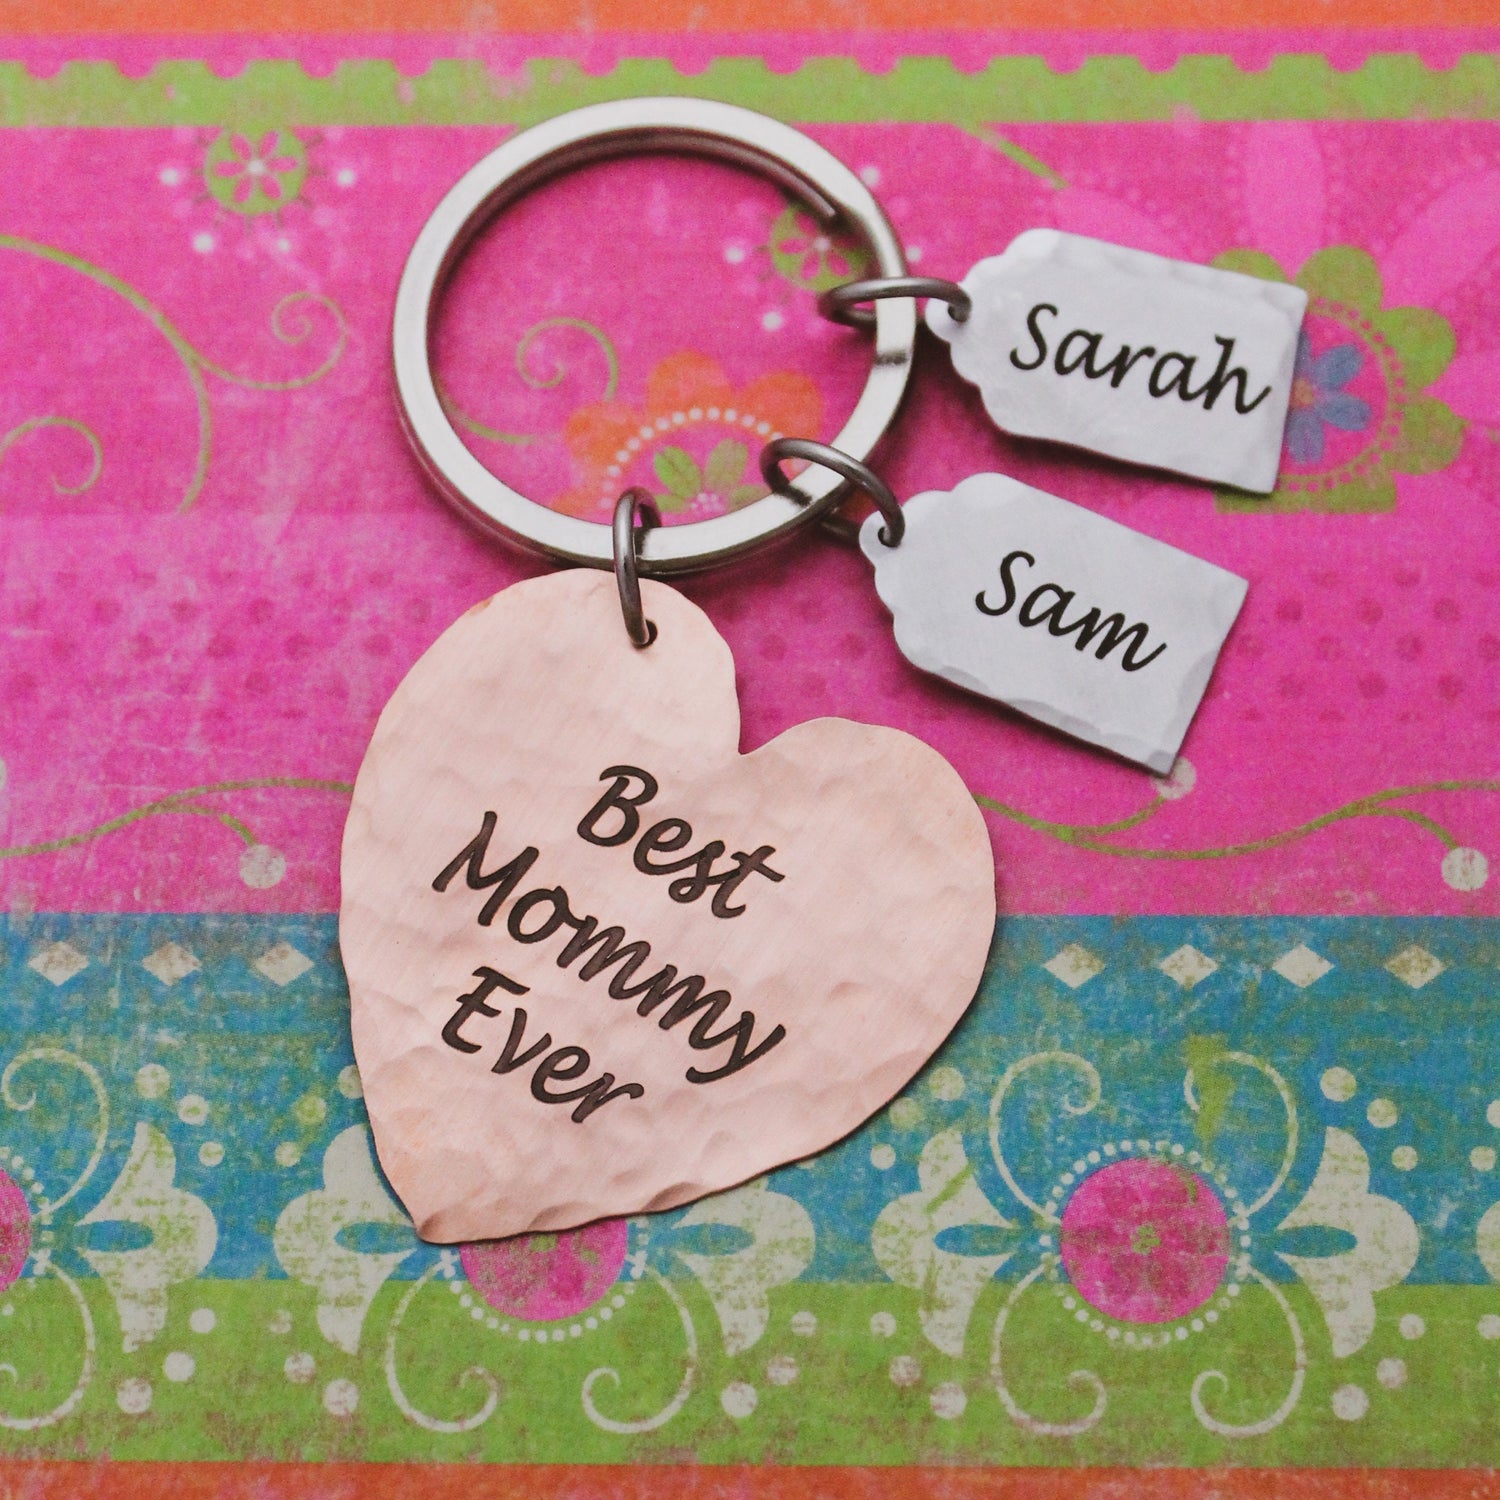 Best Mommy Ever Keychain, Custom Key Chain, Mommy Keychain, Gift for Her, Mother's Day Gift, Personalized Gift, Keychain Purse Charm for Mom